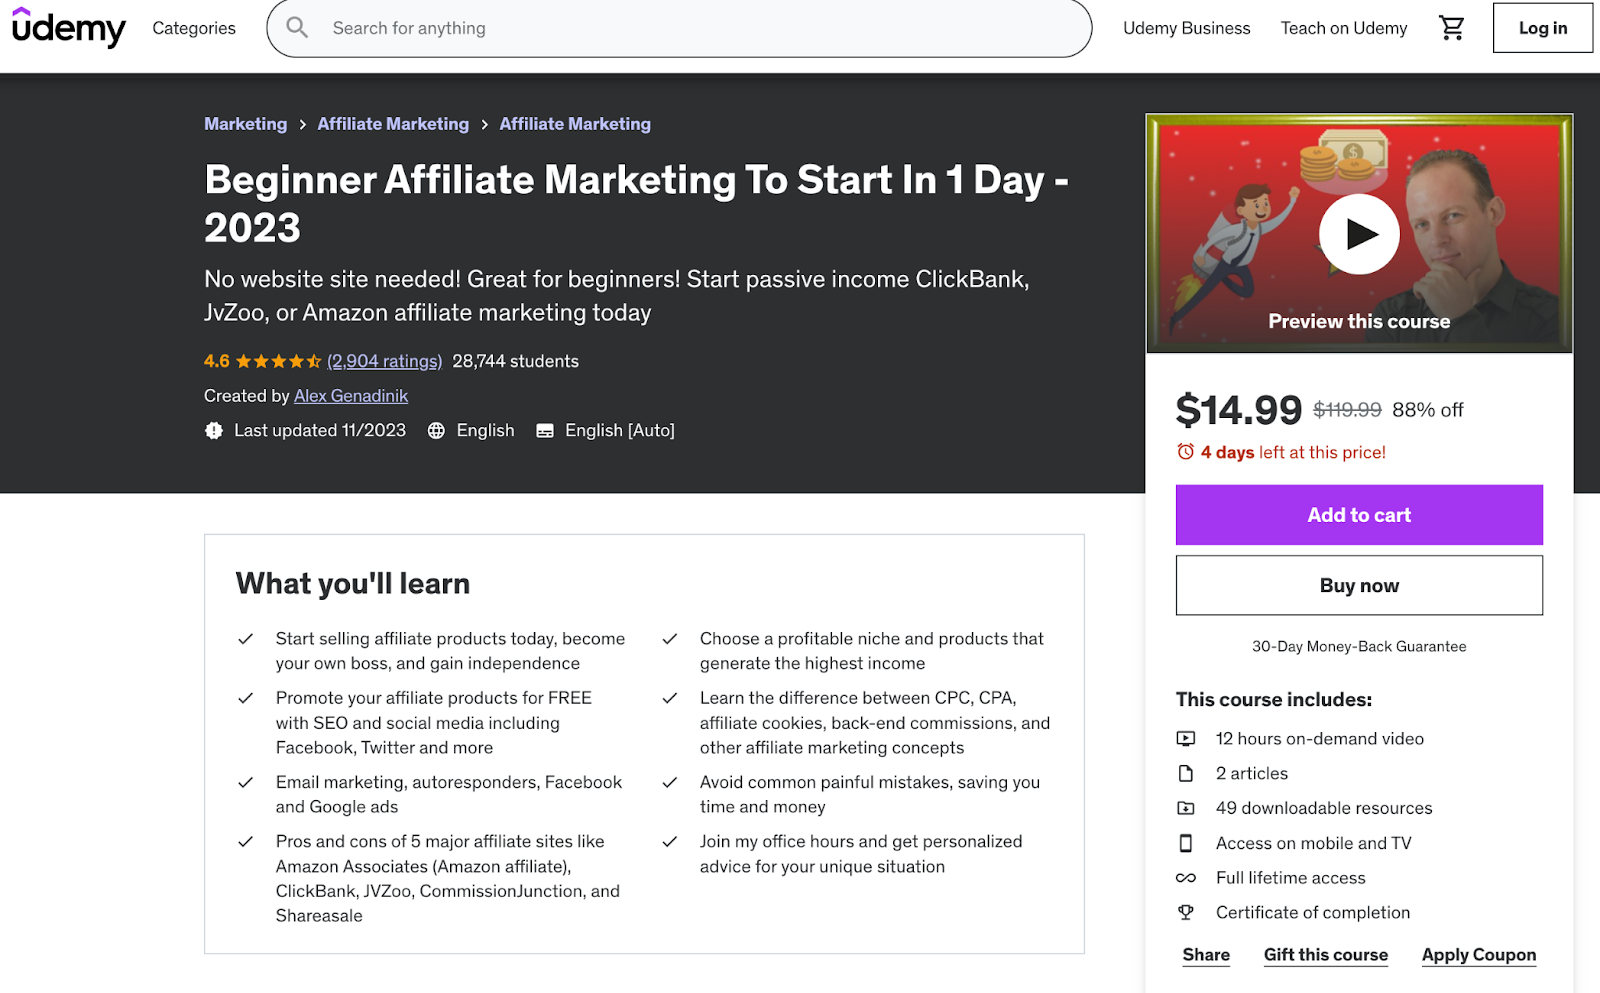  Beginner Affiliate Marketing To Start In 1 Day - 2023 course page on Udemy